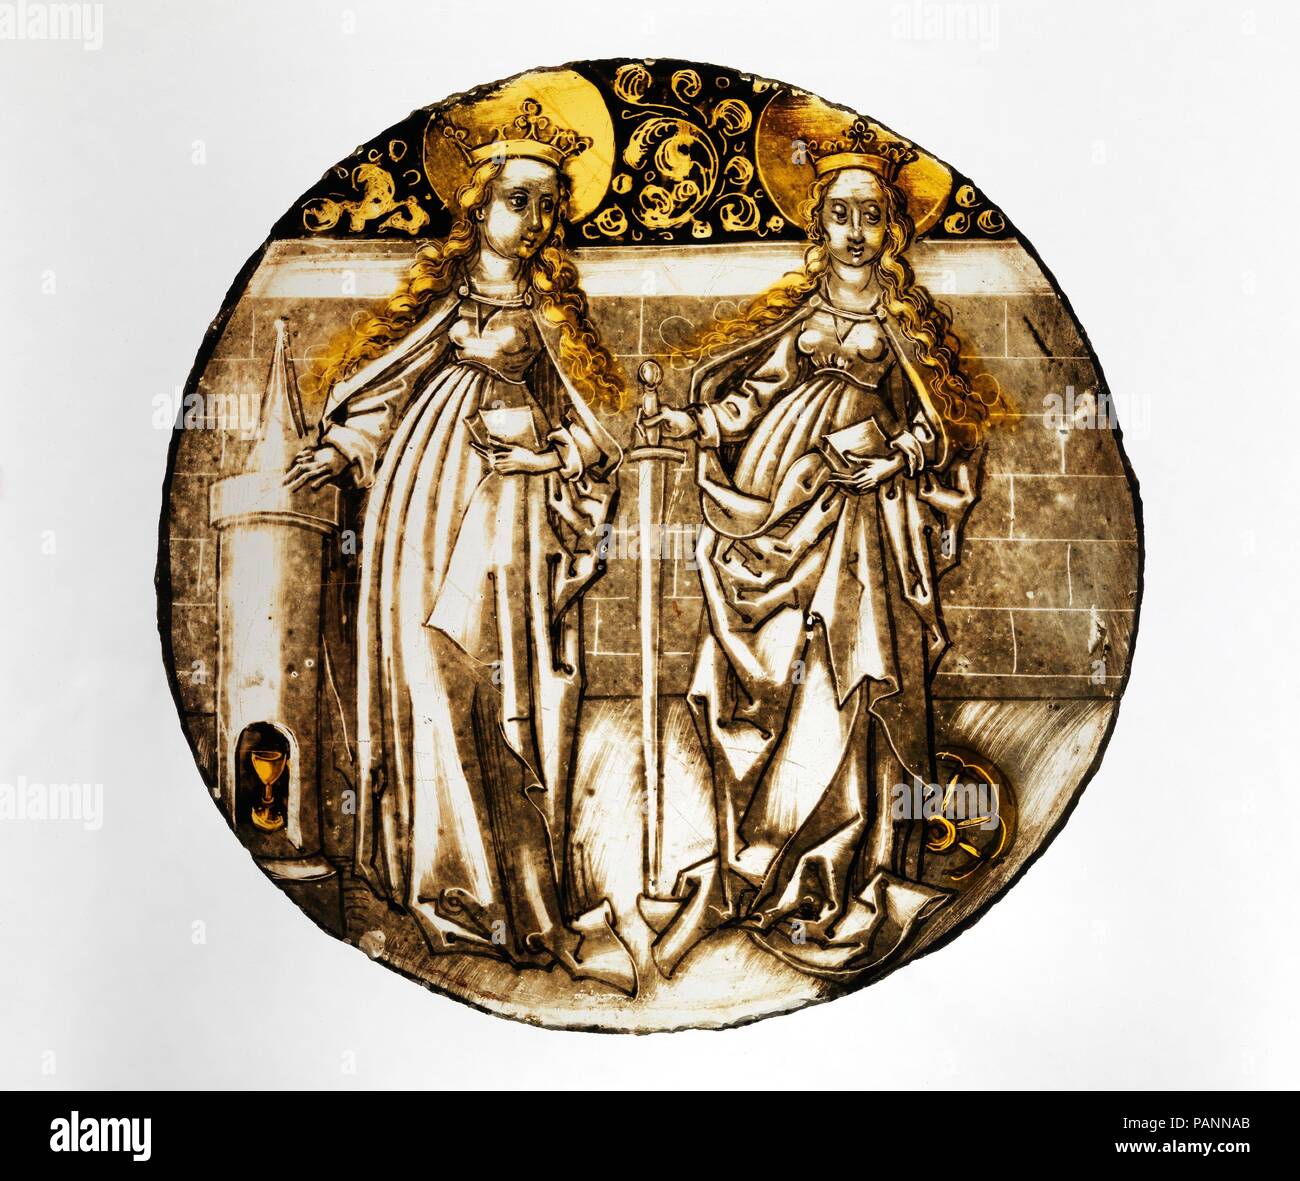 Roundel with Saints Barbara and Catherine. Culture: German. Dimensions: 6 1/4 × 1/16 in. (15.9 × 0.2 cm). Date: ca. 1500-1510.  The artist who painted this roundel, probably from Swabia in southwestern Germany, had a sure command of multiple techniques including point of brush, stylus and stick work, badger brushing and other reductive means of texturing unfired mattes as well as of silver stain. Another roundel of exactly the same size and subject is now in the Bayerisches Nationalmuseum, Munich. When one scale image is overlaid with the other the outlines correspond precisely indicating that Stock Photo